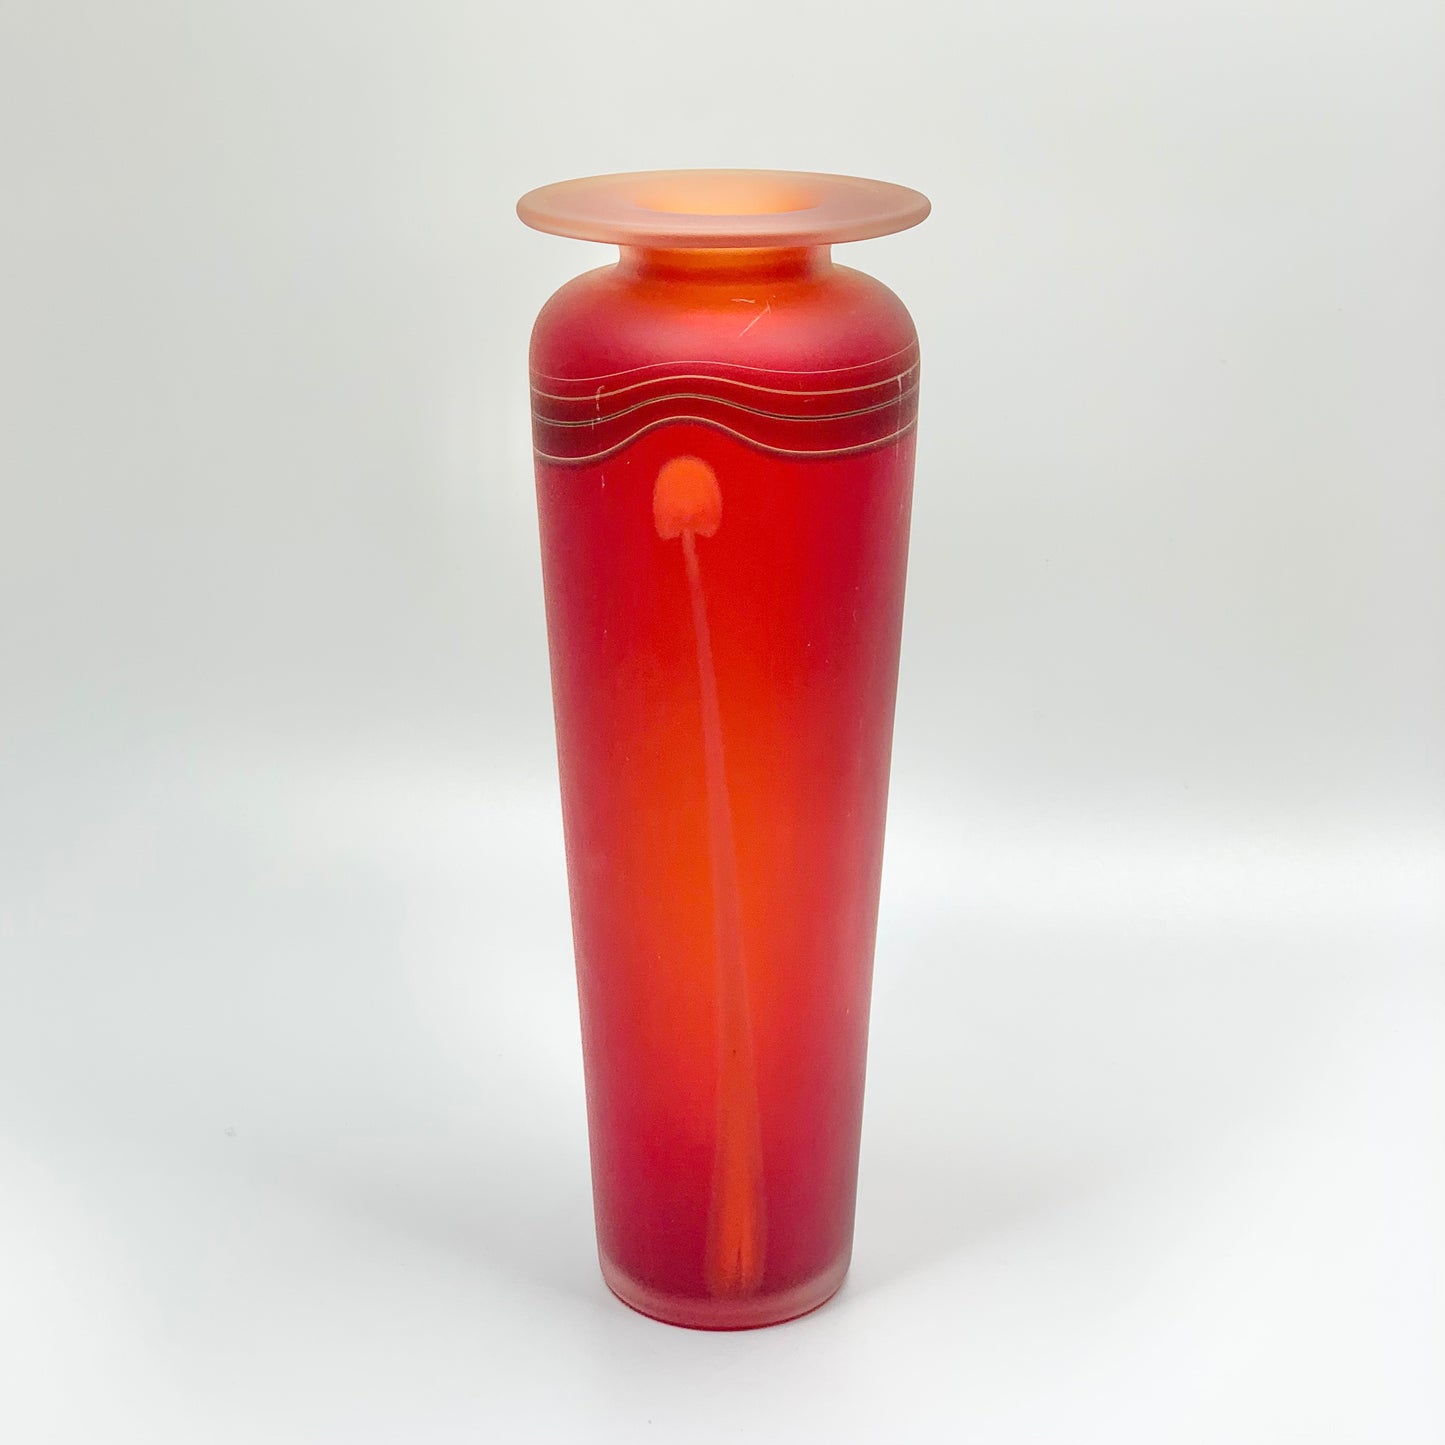 Extremely rare and collectible red satin glass vase by Robert Wynne for Denizen Studio